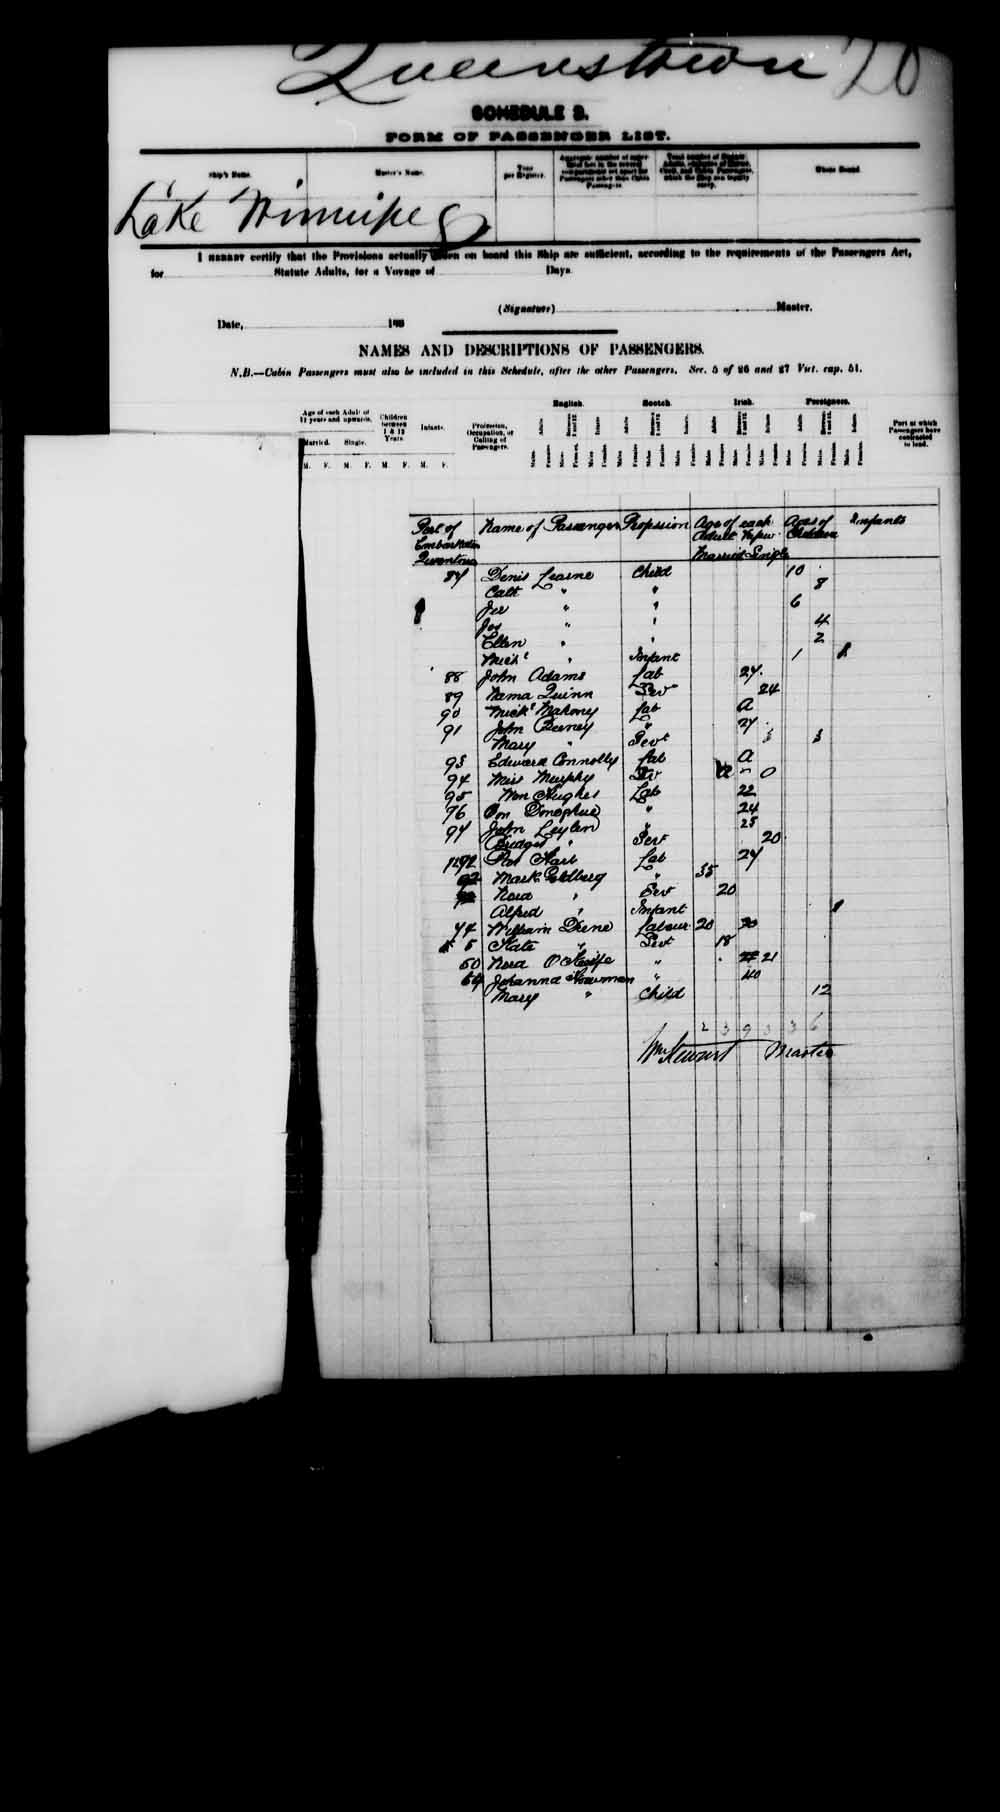 Digitized page of Passenger Lists for Image No.: e003541630